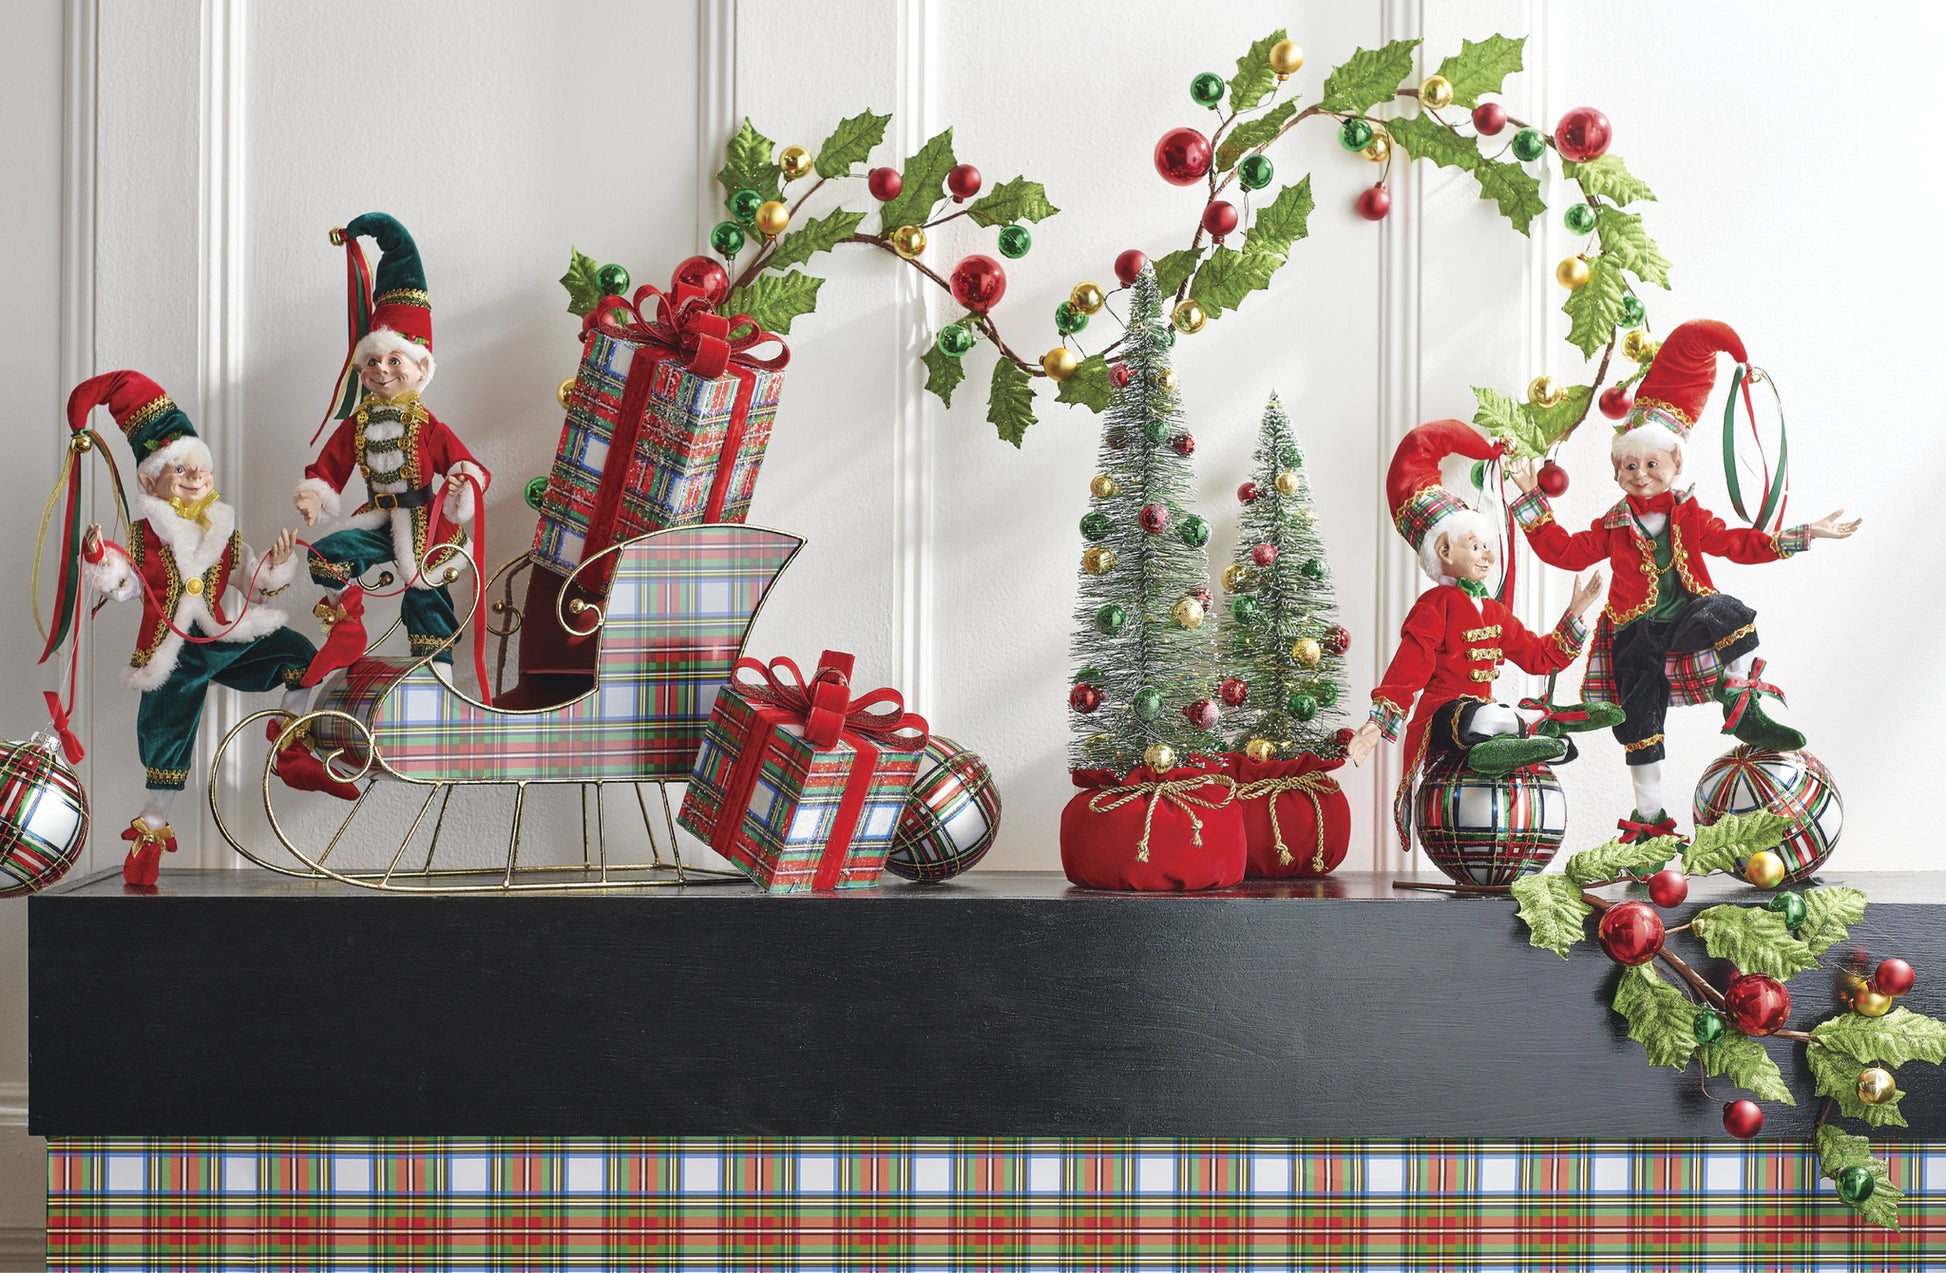 10" Plaid Package Ornaments. Set of 2. Red and white with green, blue, and yellow plaid print. Red bow and jingle bell on top. Made of Foam and Polyester. Placed on a mantel surrounded by elves and holly jolly décor and ornaments.